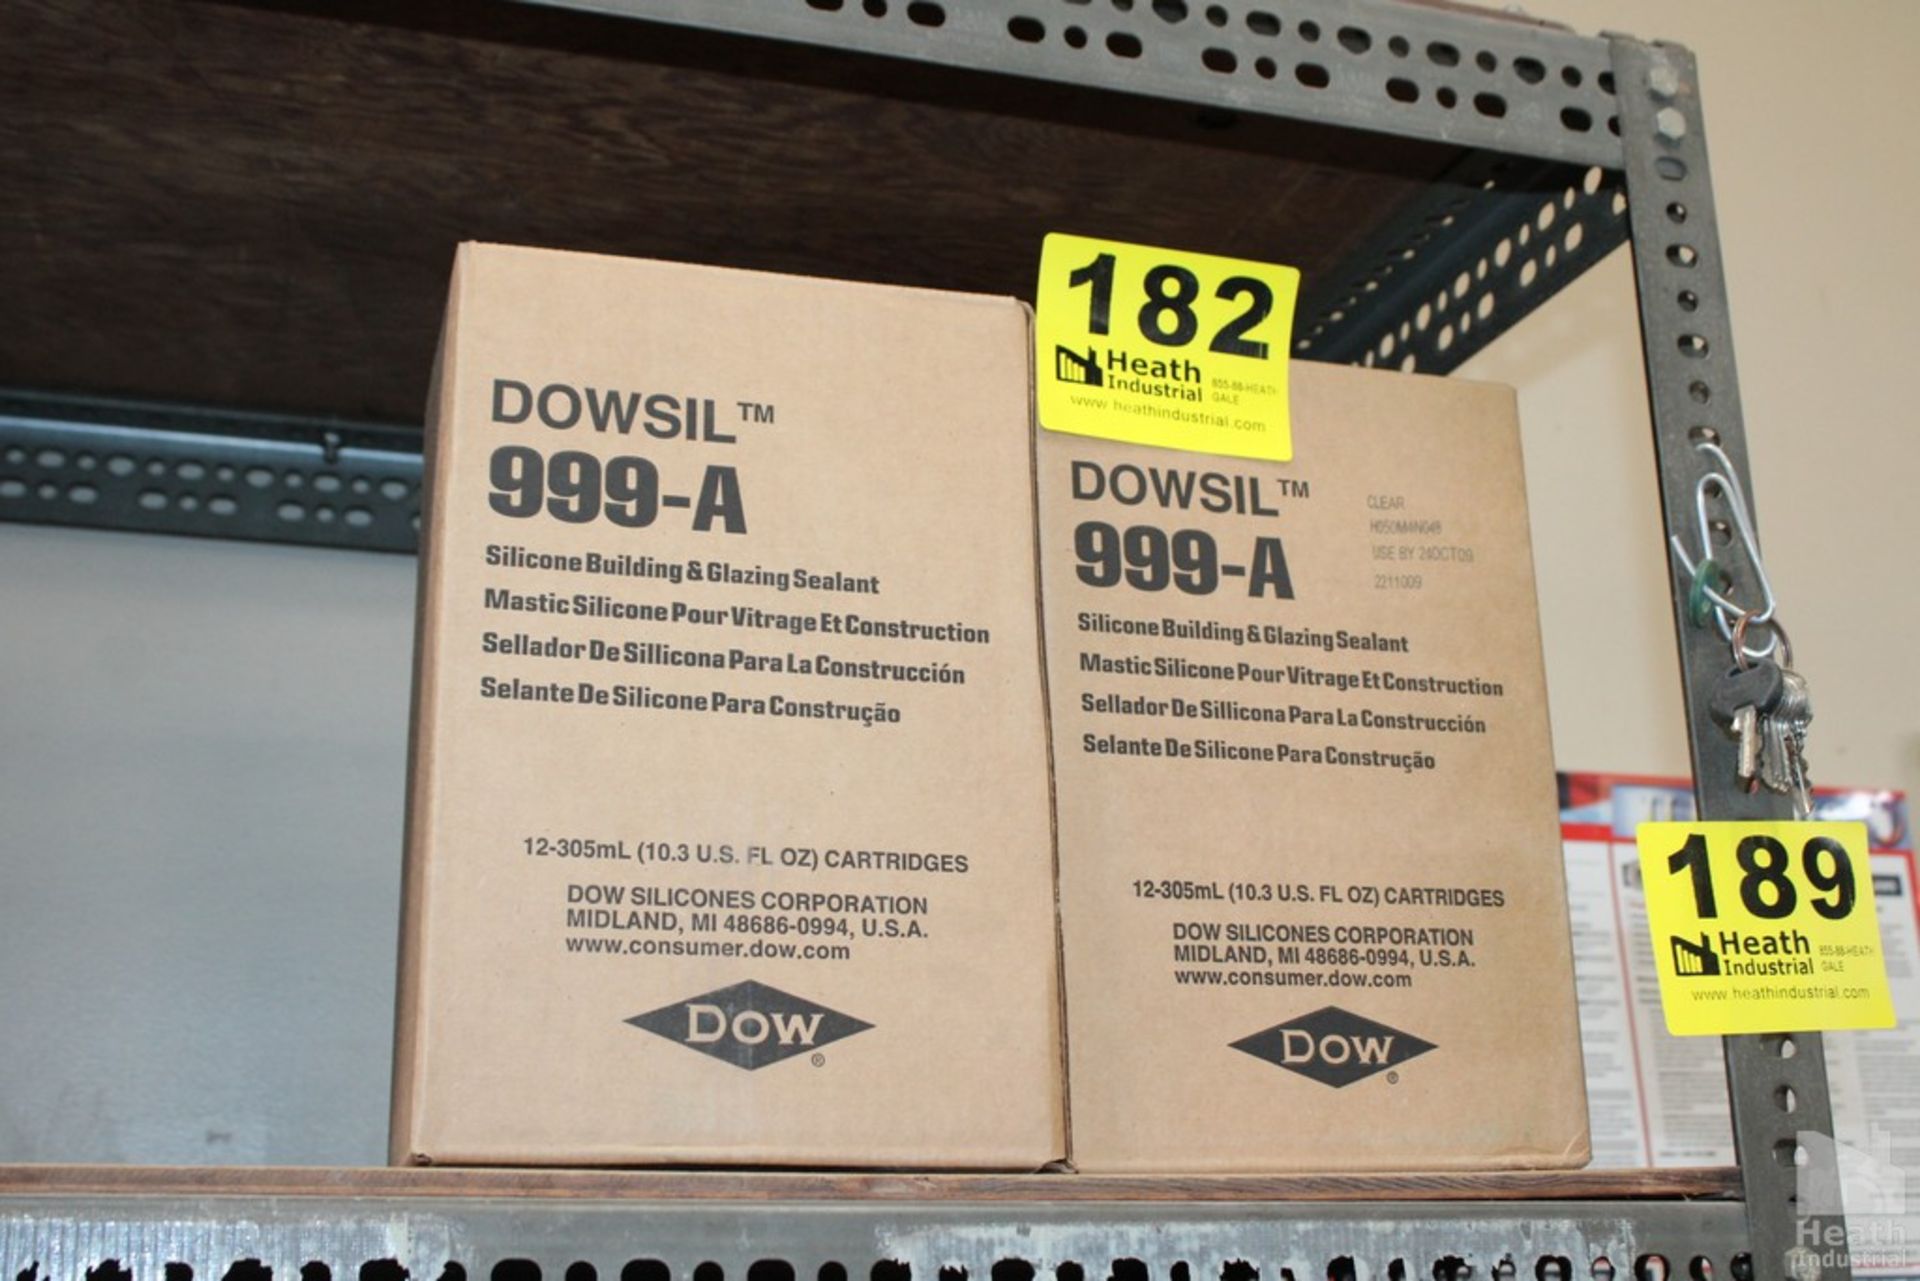 (2) BOXES OF DOWSIL 999-A SILCONE BUILDING AND GLAZING SEALANT